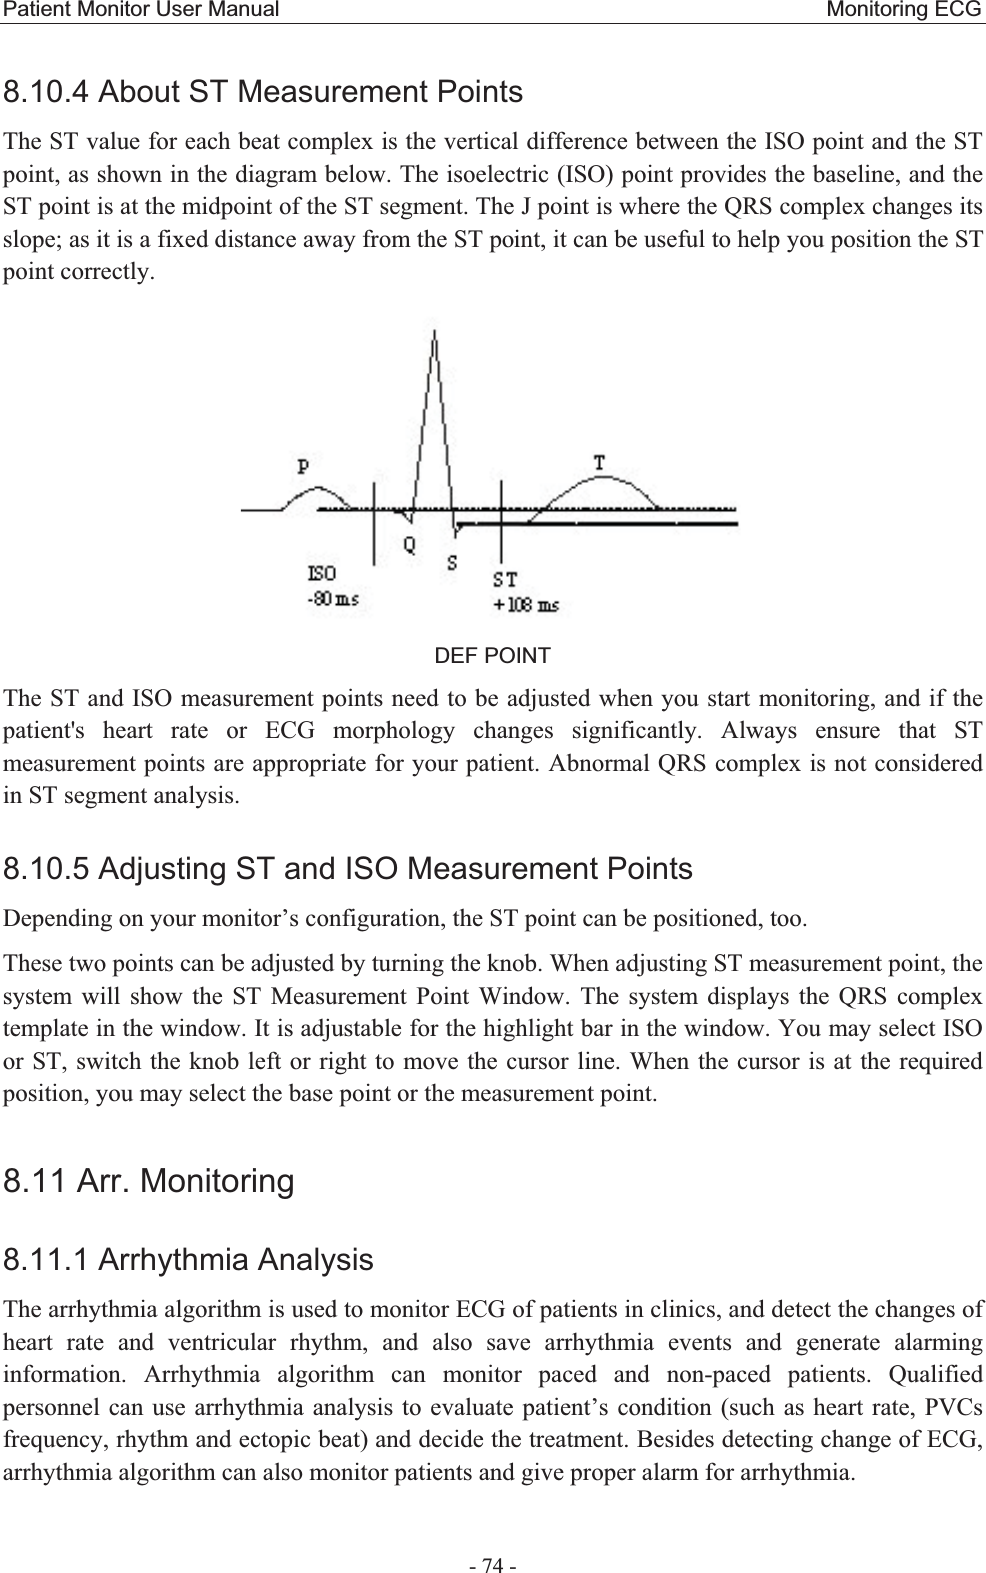 Patient Monitor User Manual                                                  Monitoring ECG  - 74 - 8.10.4 About ST Measurement Points The ST value for each beat complex is the vertical difference between the ISO point and the ST point, as shown in the diagram below. The isoelectric (ISO) point provides the baseline, and the ST point is at the midpoint of the ST segment. The J point is where the QRS complex changes its slope; as it is a fixed distance away from the ST point, it can be useful to help you position the ST point correctly.  DEF POINT The ST and ISO measurement points need to be adjusted when you start monitoring, and if the patient&apos;s heart rate or ECG morphology changes significantly. Always ensure that ST measurement points are appropriate for your patient. Abnormal QRS complex is not considered in ST segment analysis. 8.10.5 Adjusting ST and ISO Measurement PointsDepending on your monitor’s configuration, the ST point can be positioned, too. These two points can be adjusted by turning the knob. When adjusting ST measurement point, the system will show the ST Measurement Point Window. The system displays the QRS complex template in the window. It is adjustable for the highlight bar in the window. You may select ISO or ST, switch the knob left or right to move the cursor line. When the cursor is at the required position, you may select the base point or the measurement point. 8.11 Arr. Monitoring 8.11.1 Arrhythmia AnalysisThe arrhythmia algorithm is used to monitor ECG of patients in clinics, and detect the changes of heart rate and ventricular rhythm, and also save arrhythmia events and generate alarming information. Arrhythmia algorithm can monitor paced and non-paced patients. Qualified personnel can use arrhythmia analysis to evaluate patient’s condition (such as heart rate, PVCs frequency, rhythm and ectopic beat) and decide the treatment. Besides detecting change of ECG, arrhythmia algorithm can also monitor patients and give proper alarm for arrhythmia. 